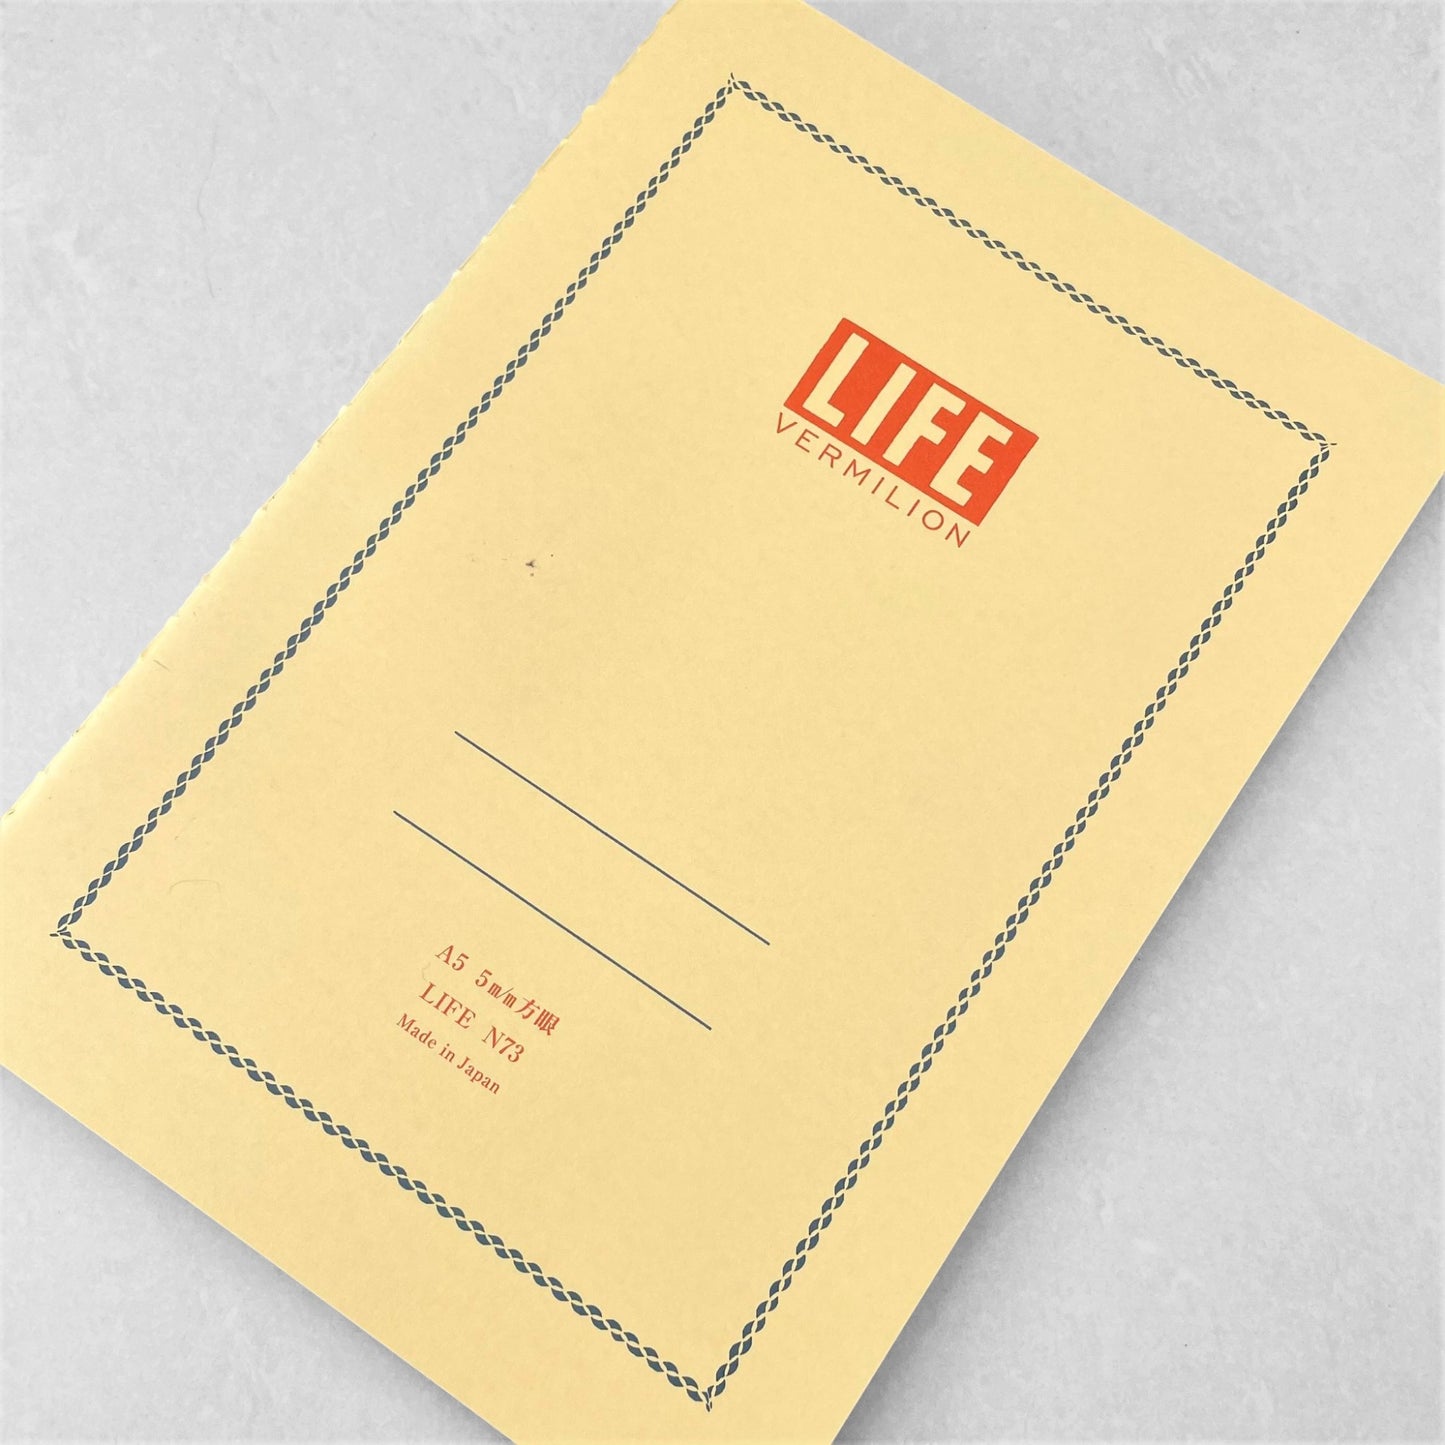 A5 softcover notebook with a soft yellow cover with blue border and branding by Japanese brand Life Japan